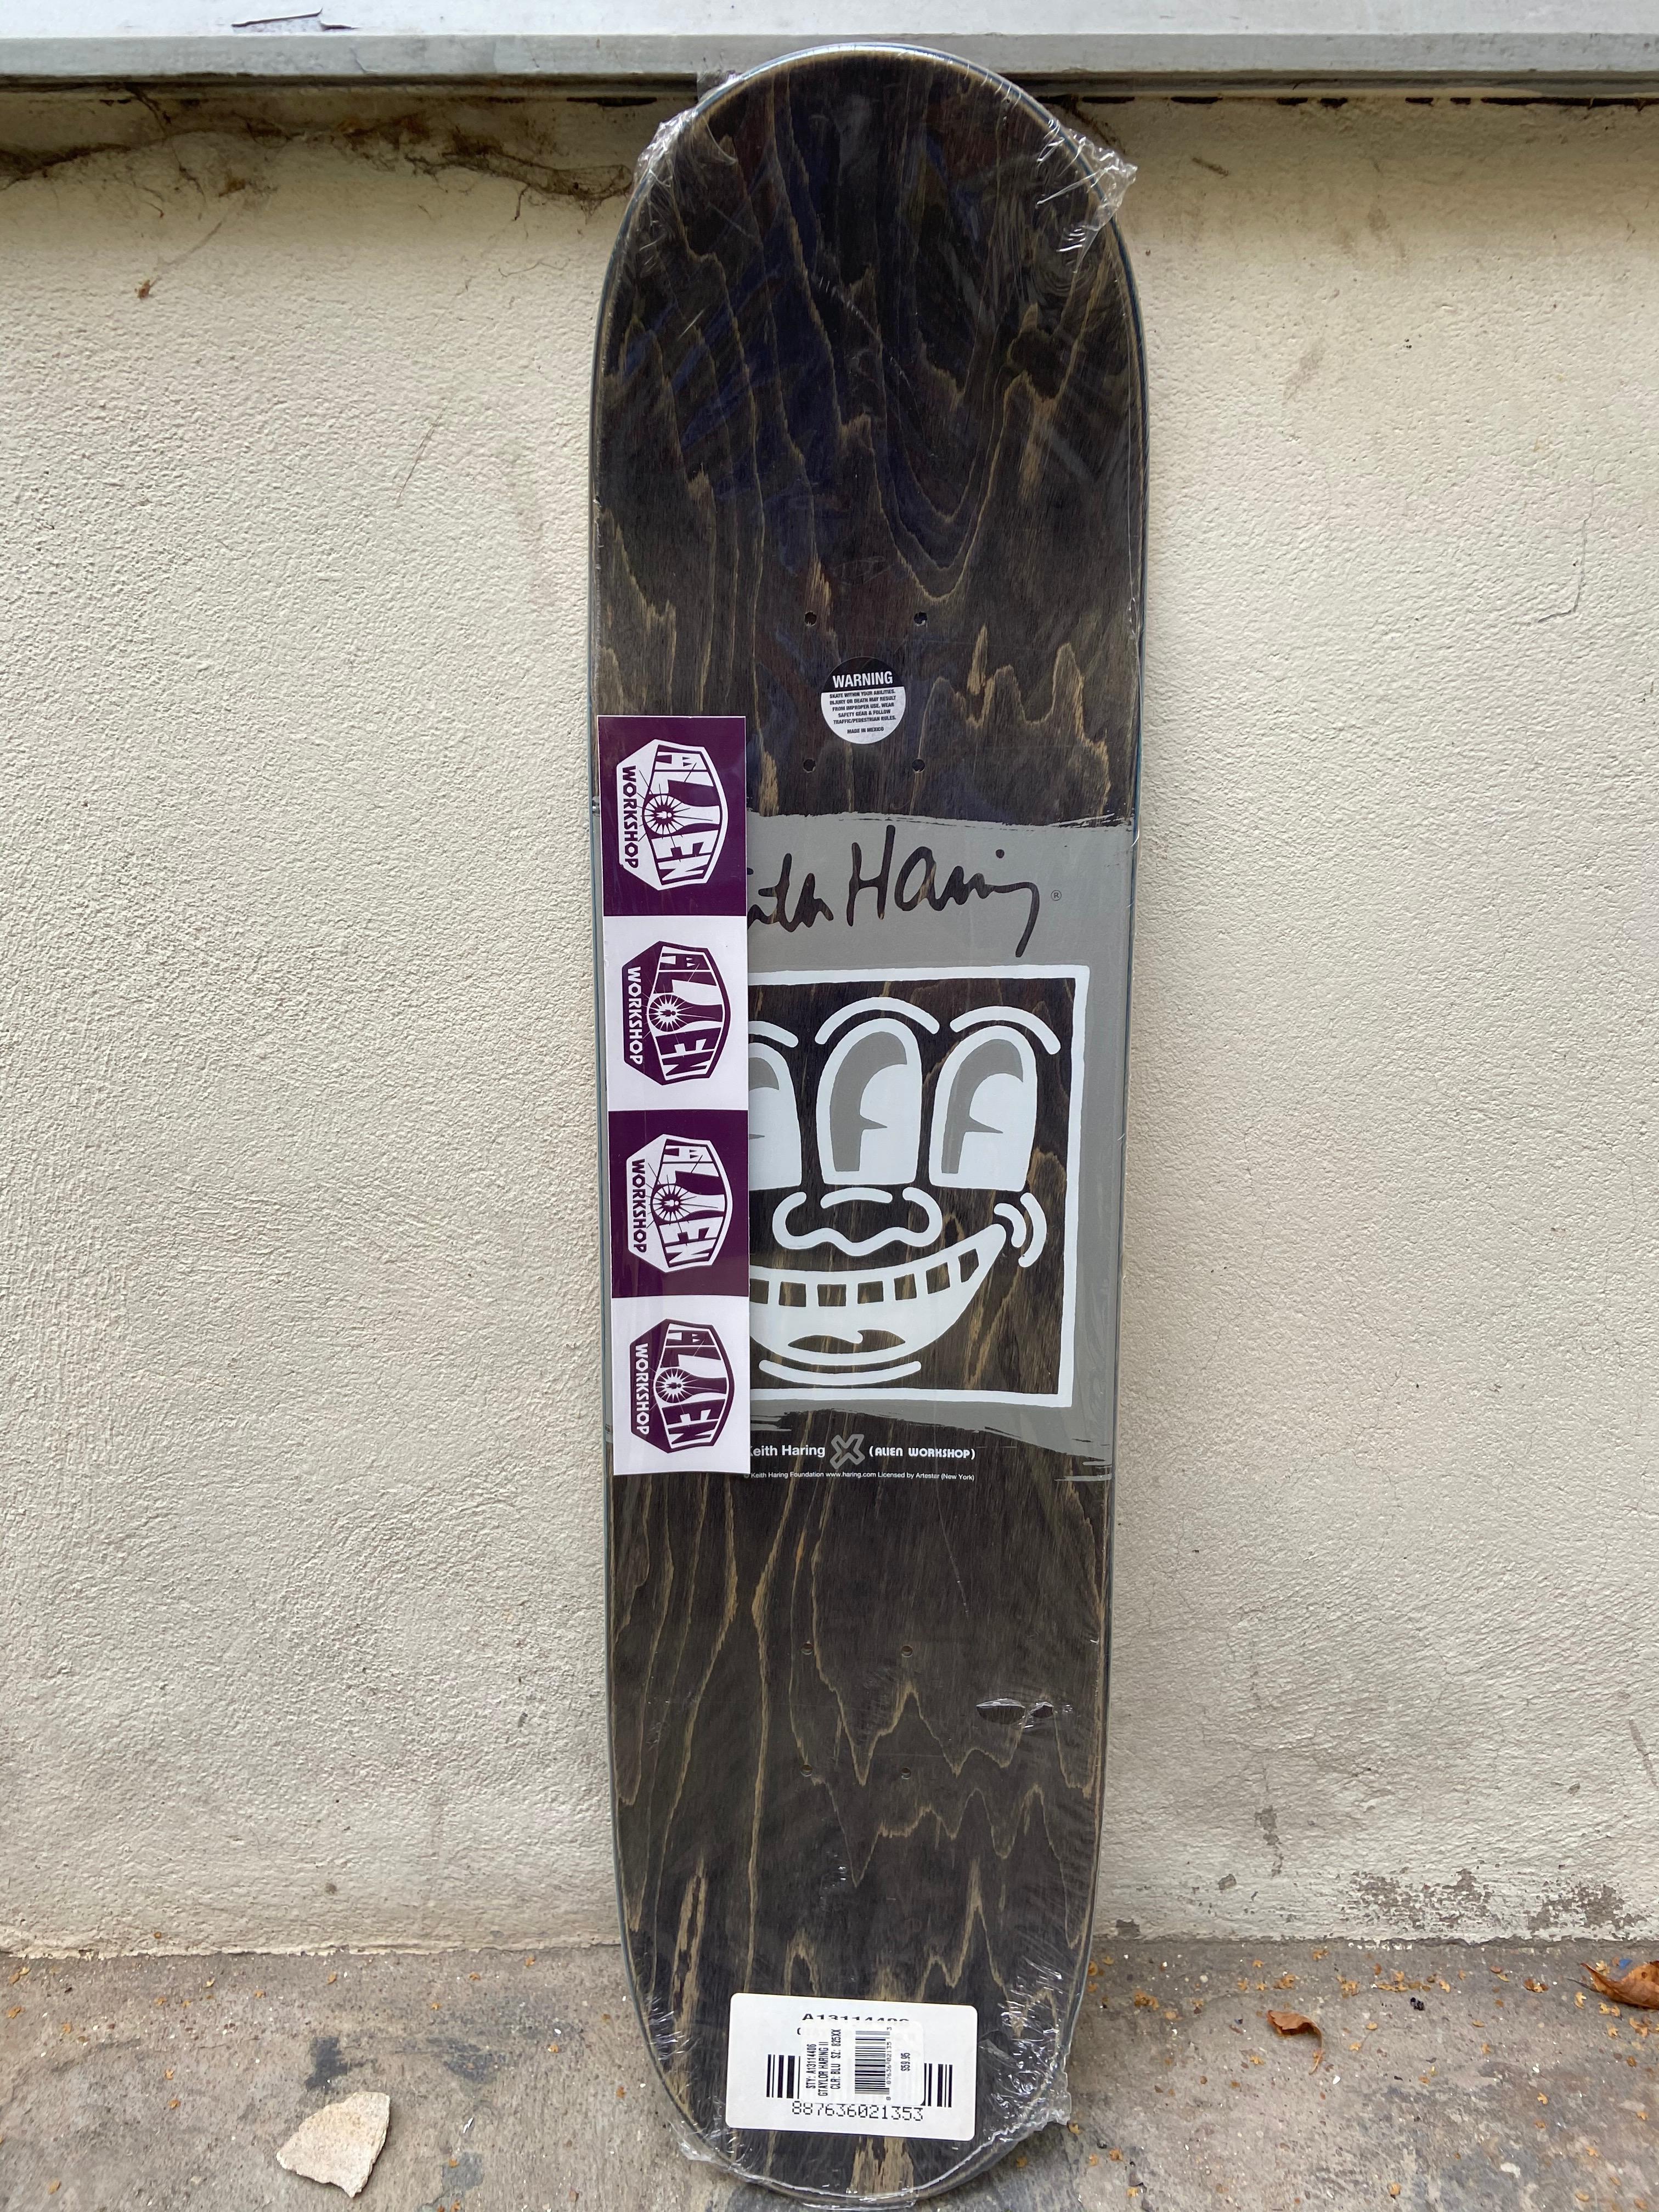 Keith Haring - GRANT
Skate board Collector
Published by Alien workshop
circa 2008
Front and back decoration 
80.5 x 20.5 - size 825 XX 
Condition : New 
390 euros.